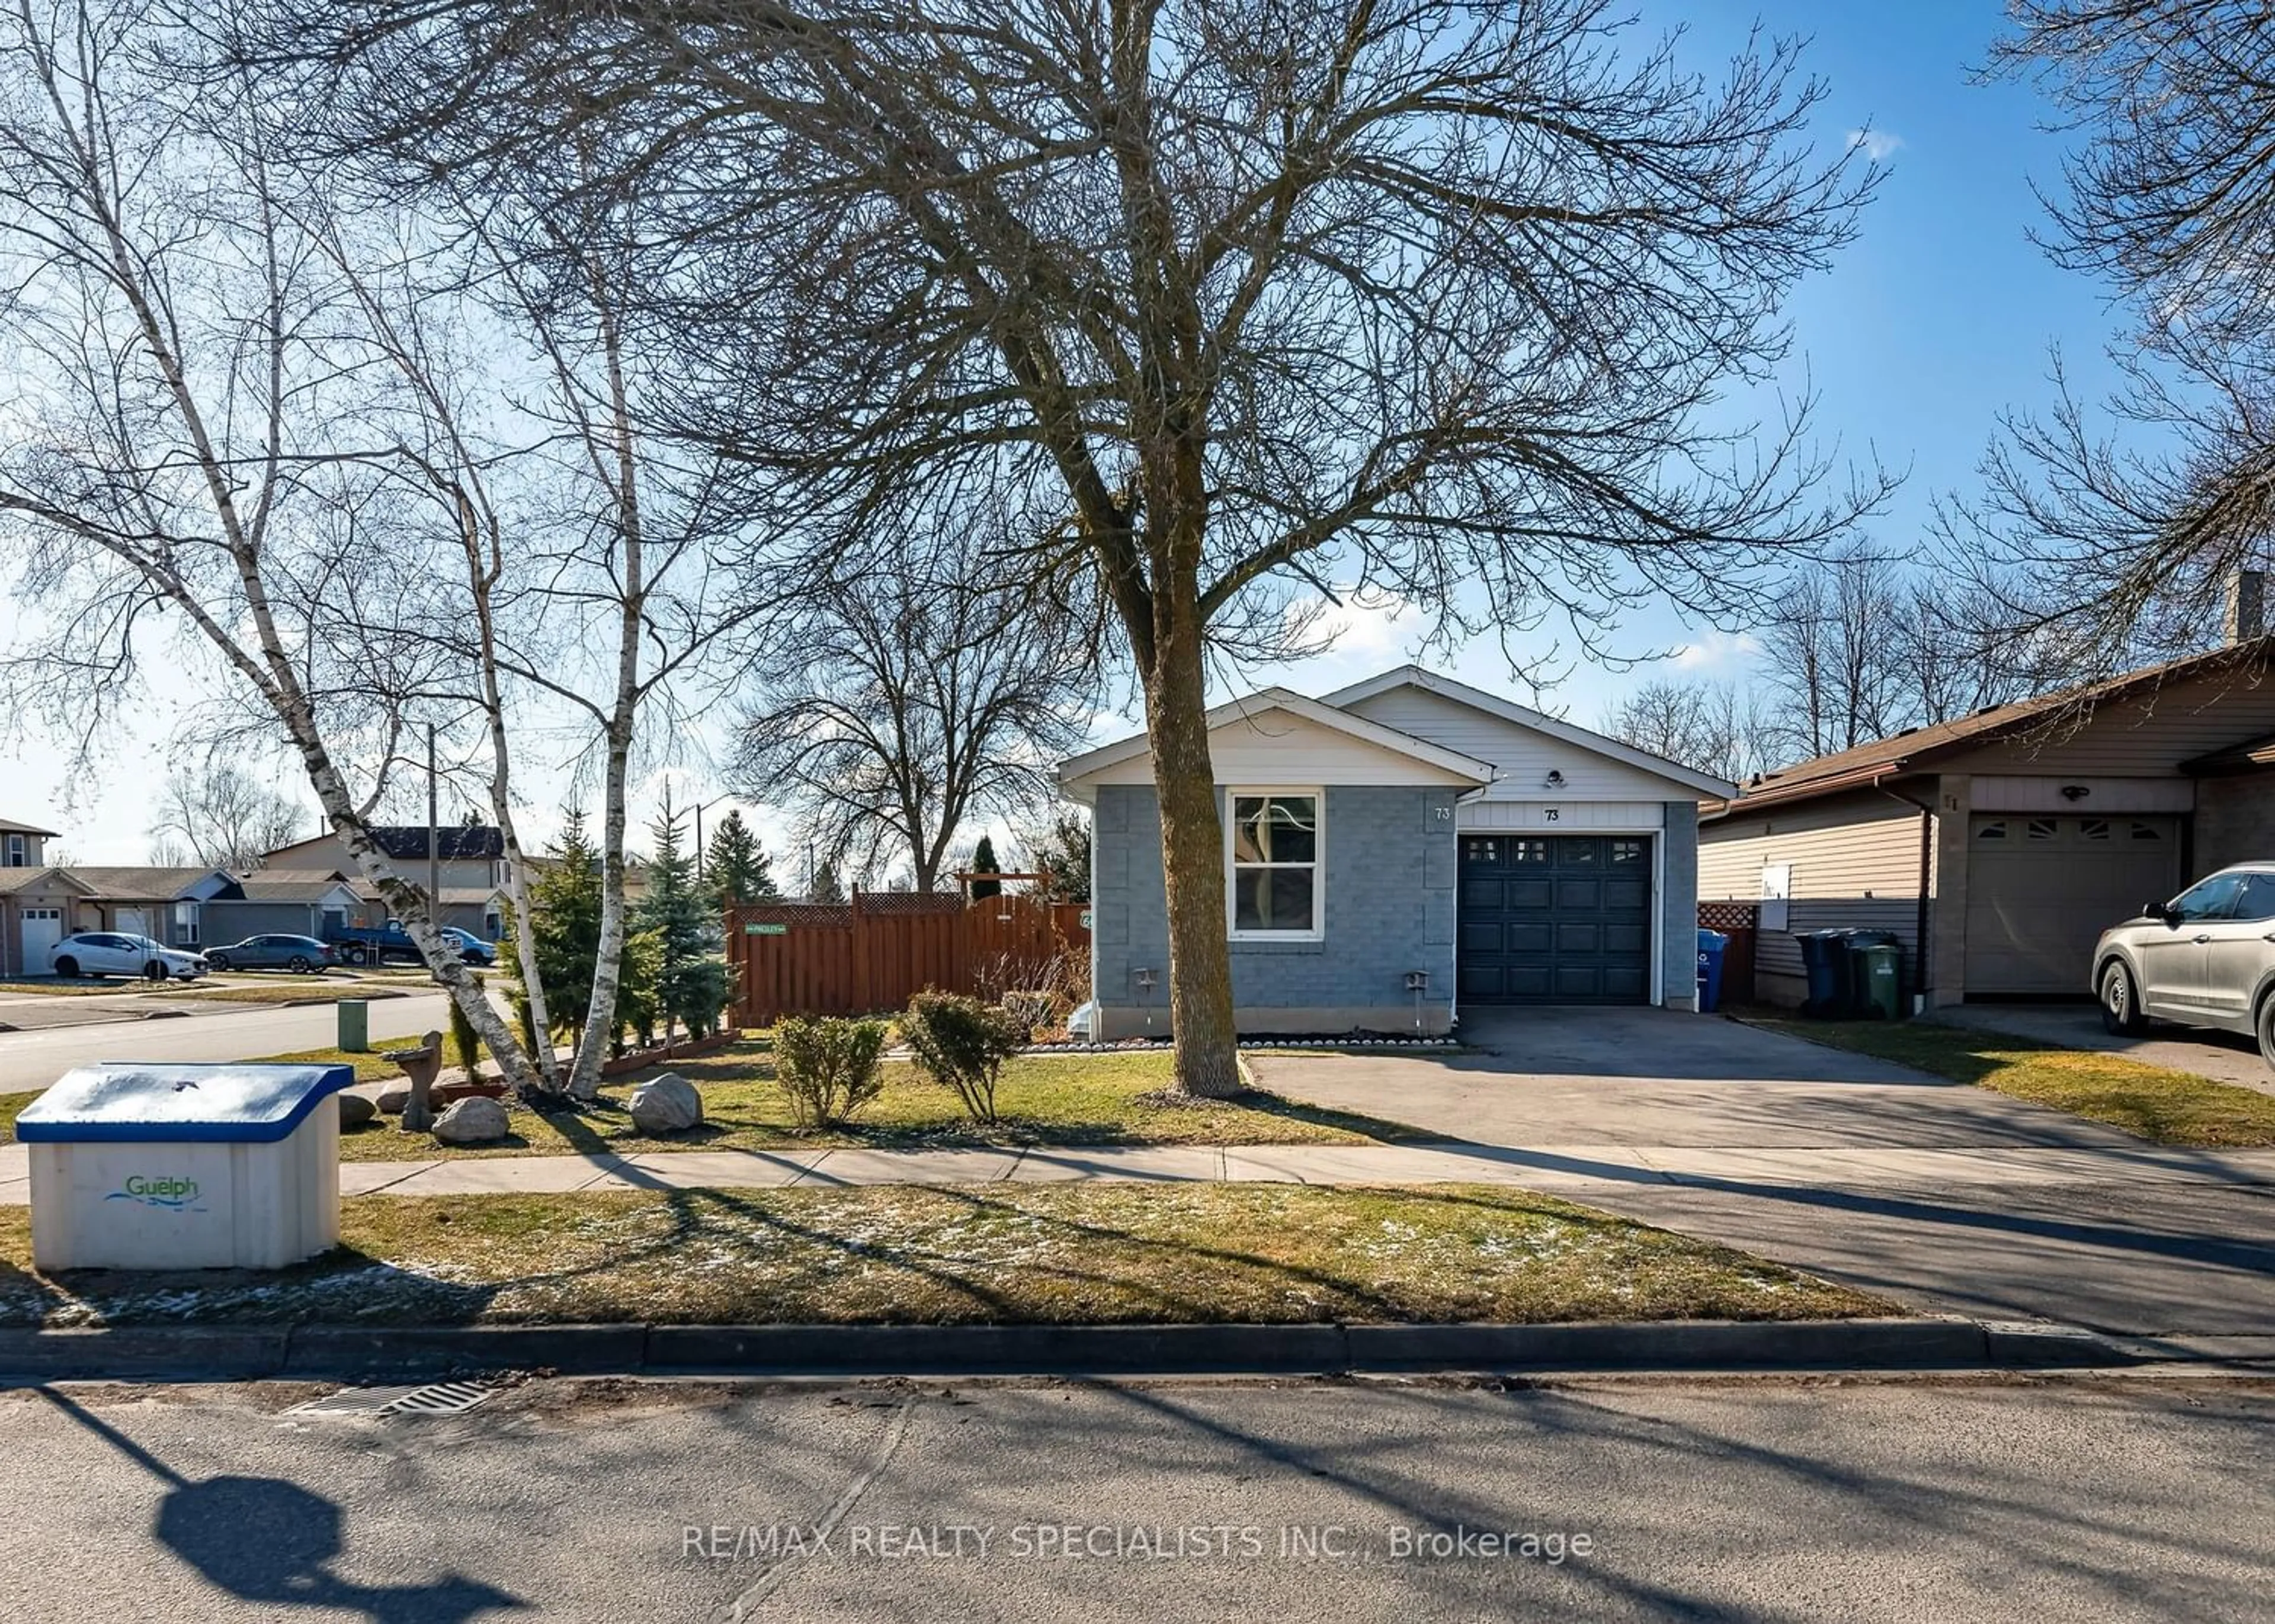 Frontside or backside of a home for 73 Leacock Ave, Guelph Ontario N1E 6P9